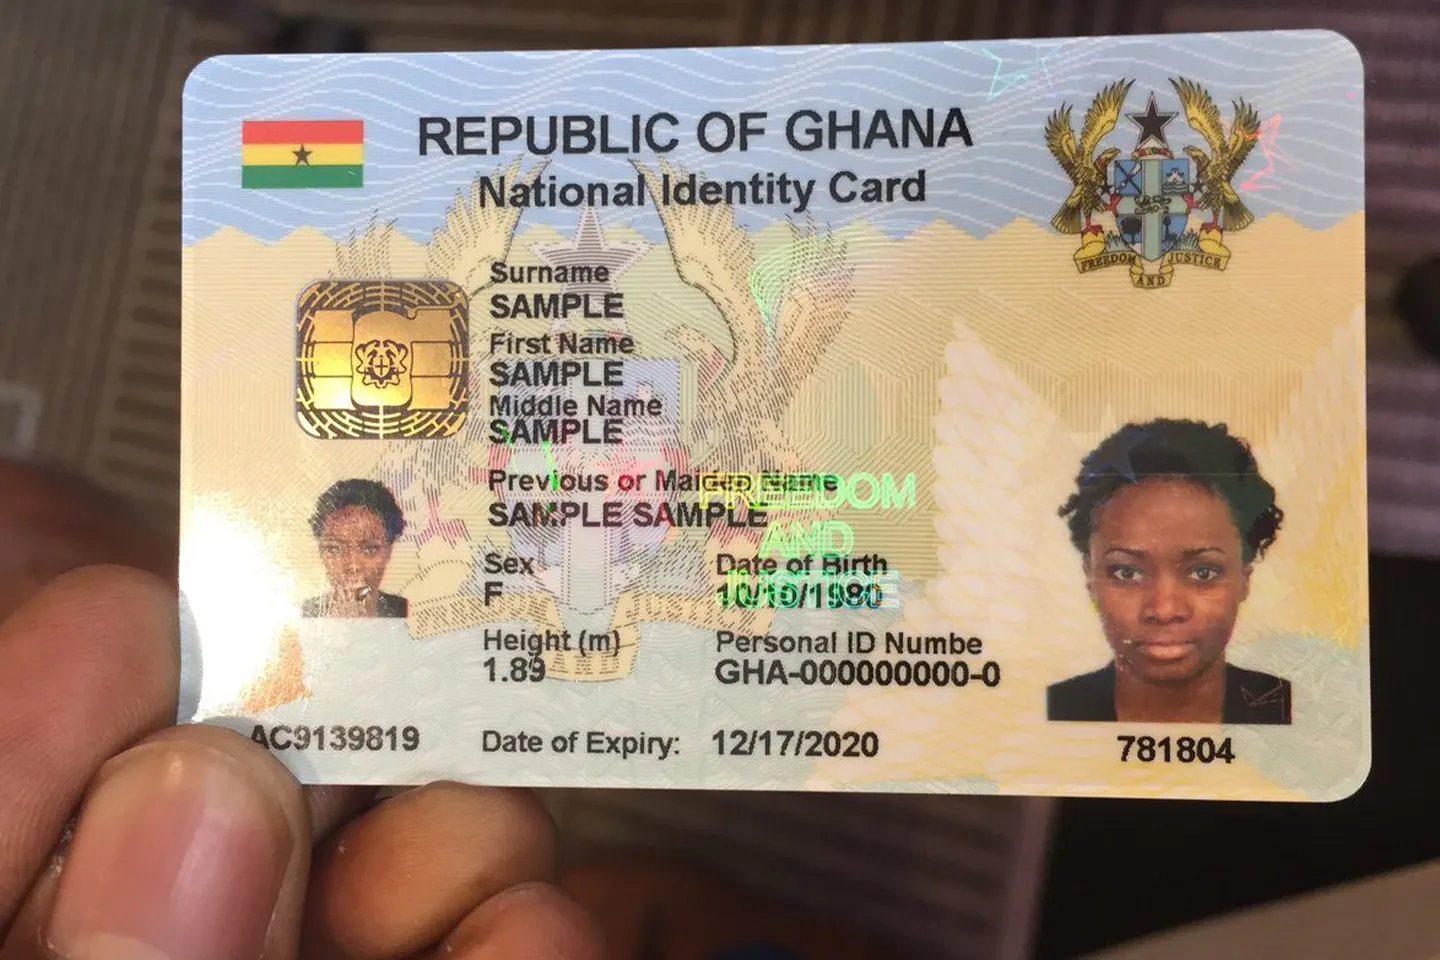 Ghana card is a total rip-off, Bright Simons writes